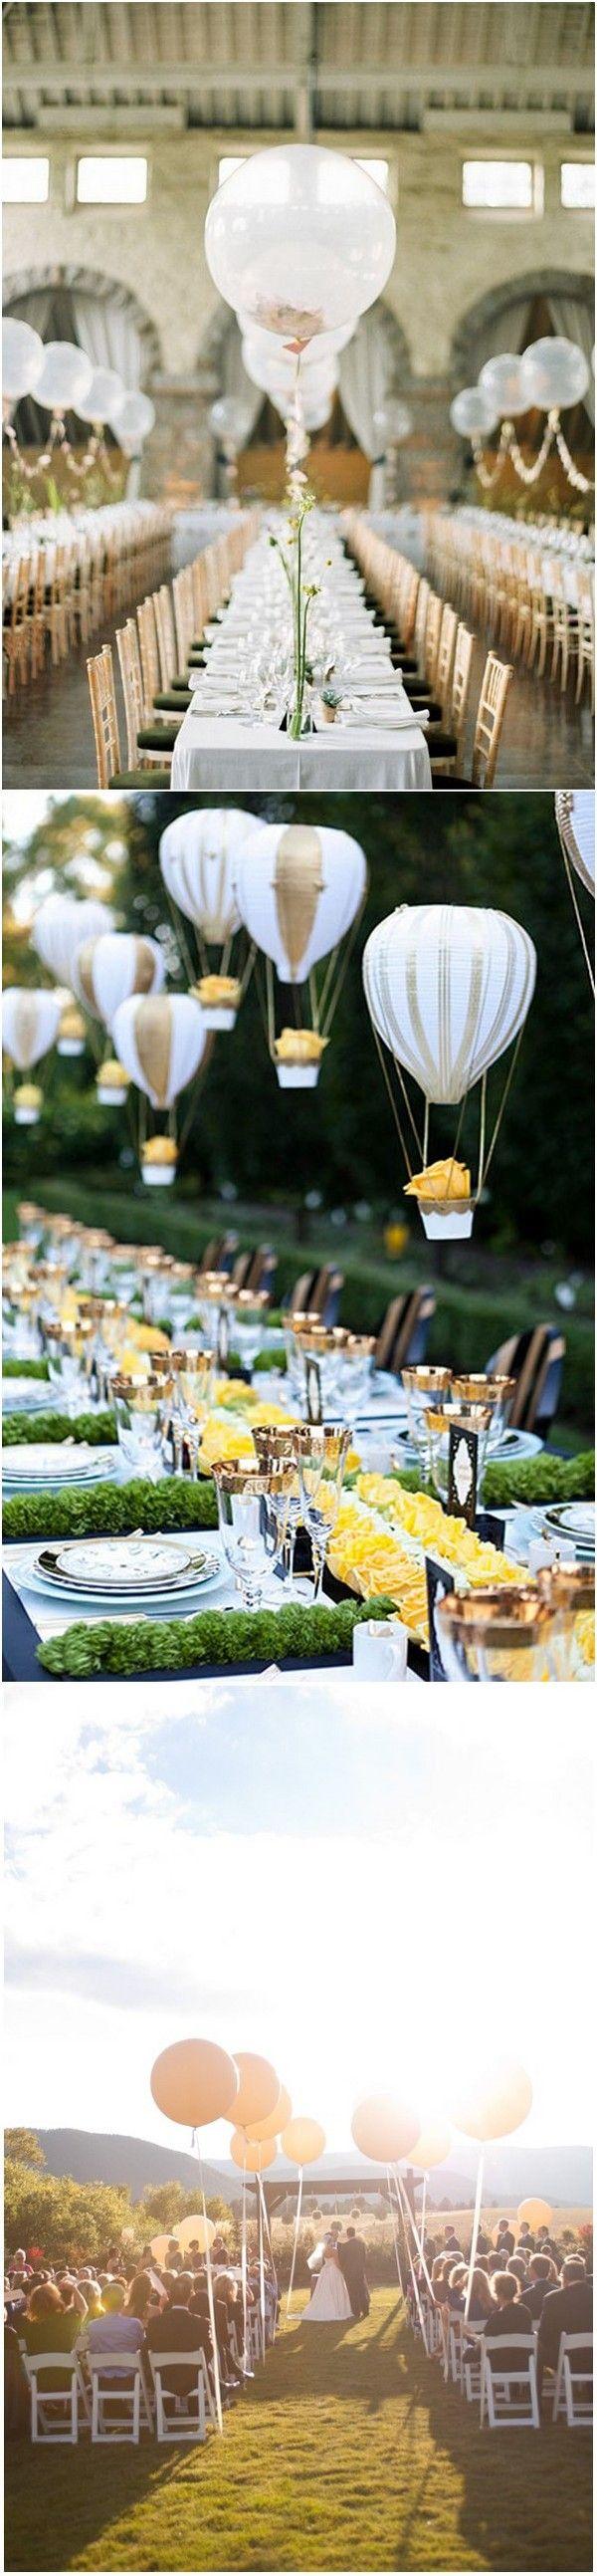 Hochzeit - 16 Romantic Wedding Decoration Ideas With Balloons - Page 3 Of 3